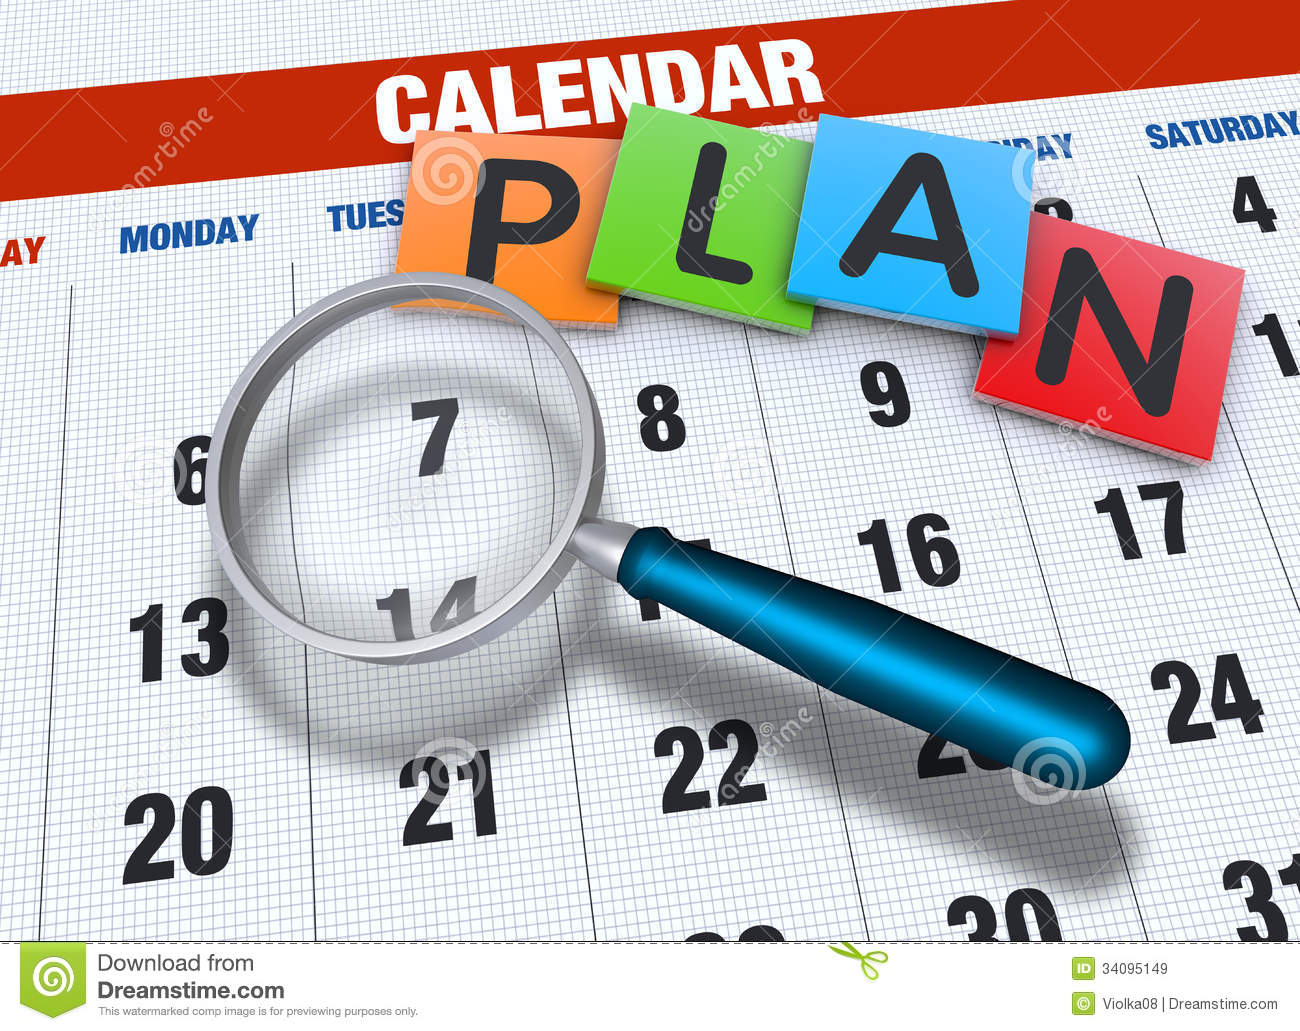 Calendar With Magnifying Glass Royalty Free Stock Images   Image